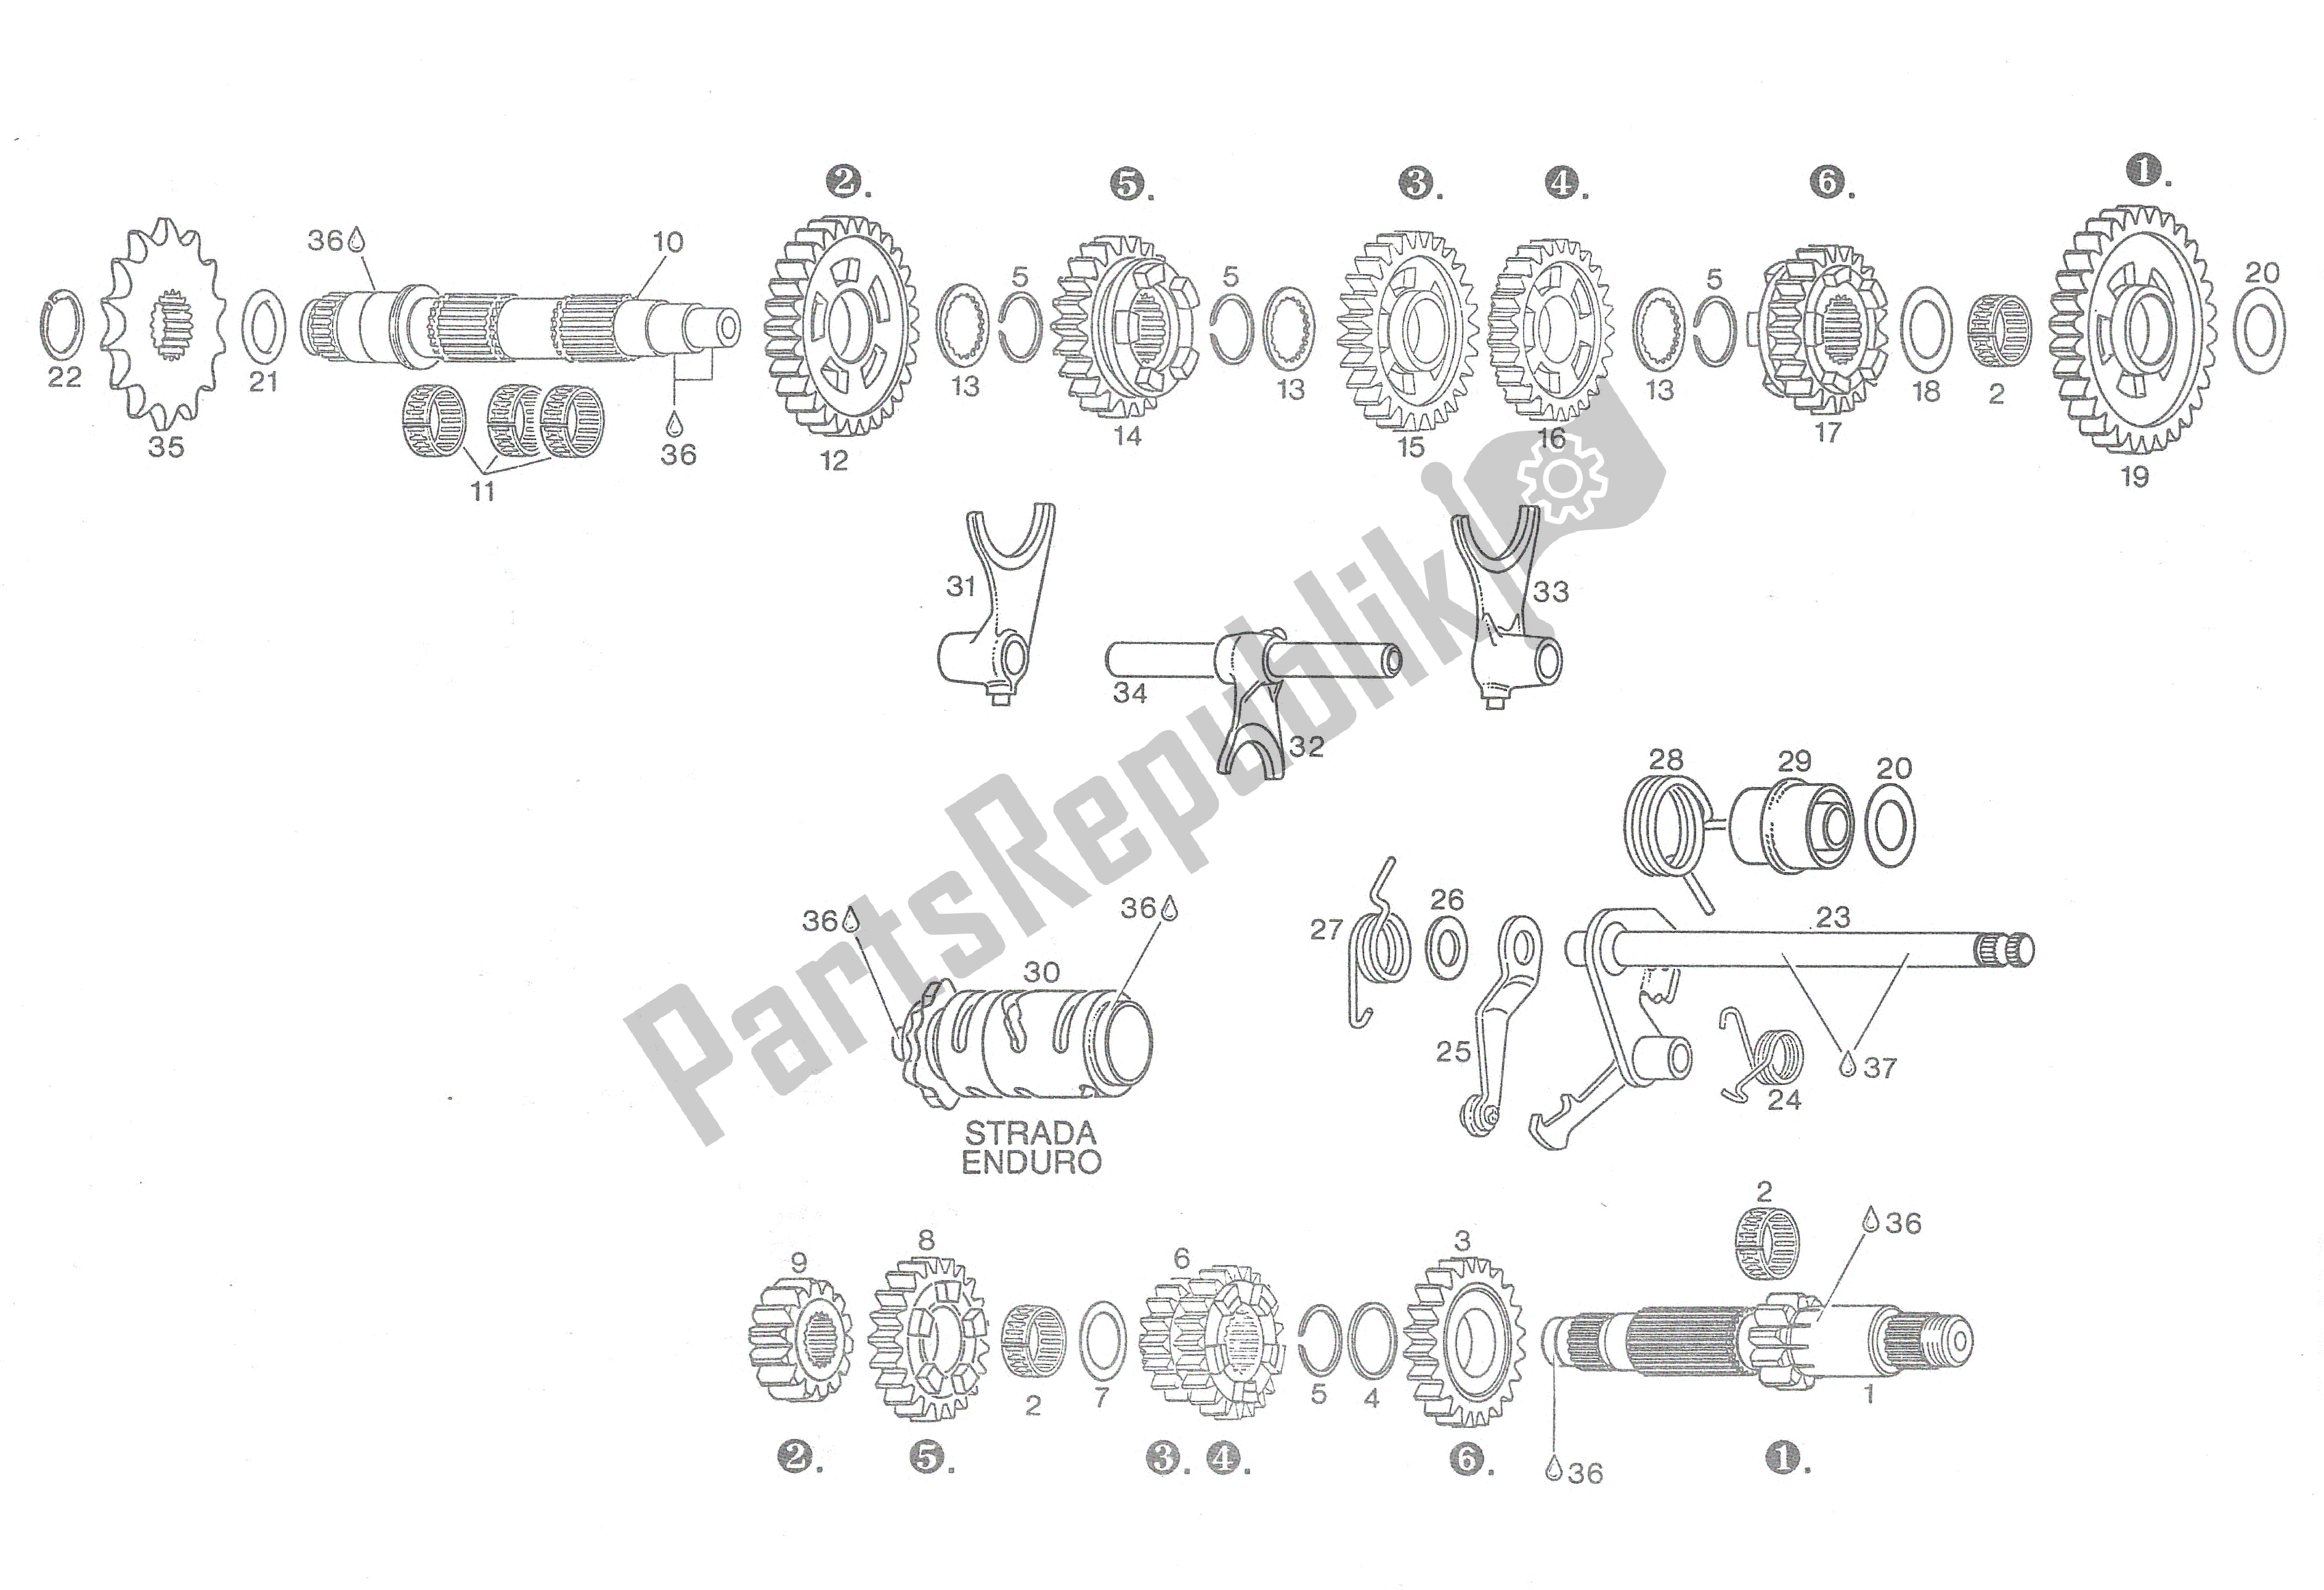 All parts for the 6-speed Transmission, S T R A D A Sport Production of the Aprilia Rotax 123 125 1991 - 1992